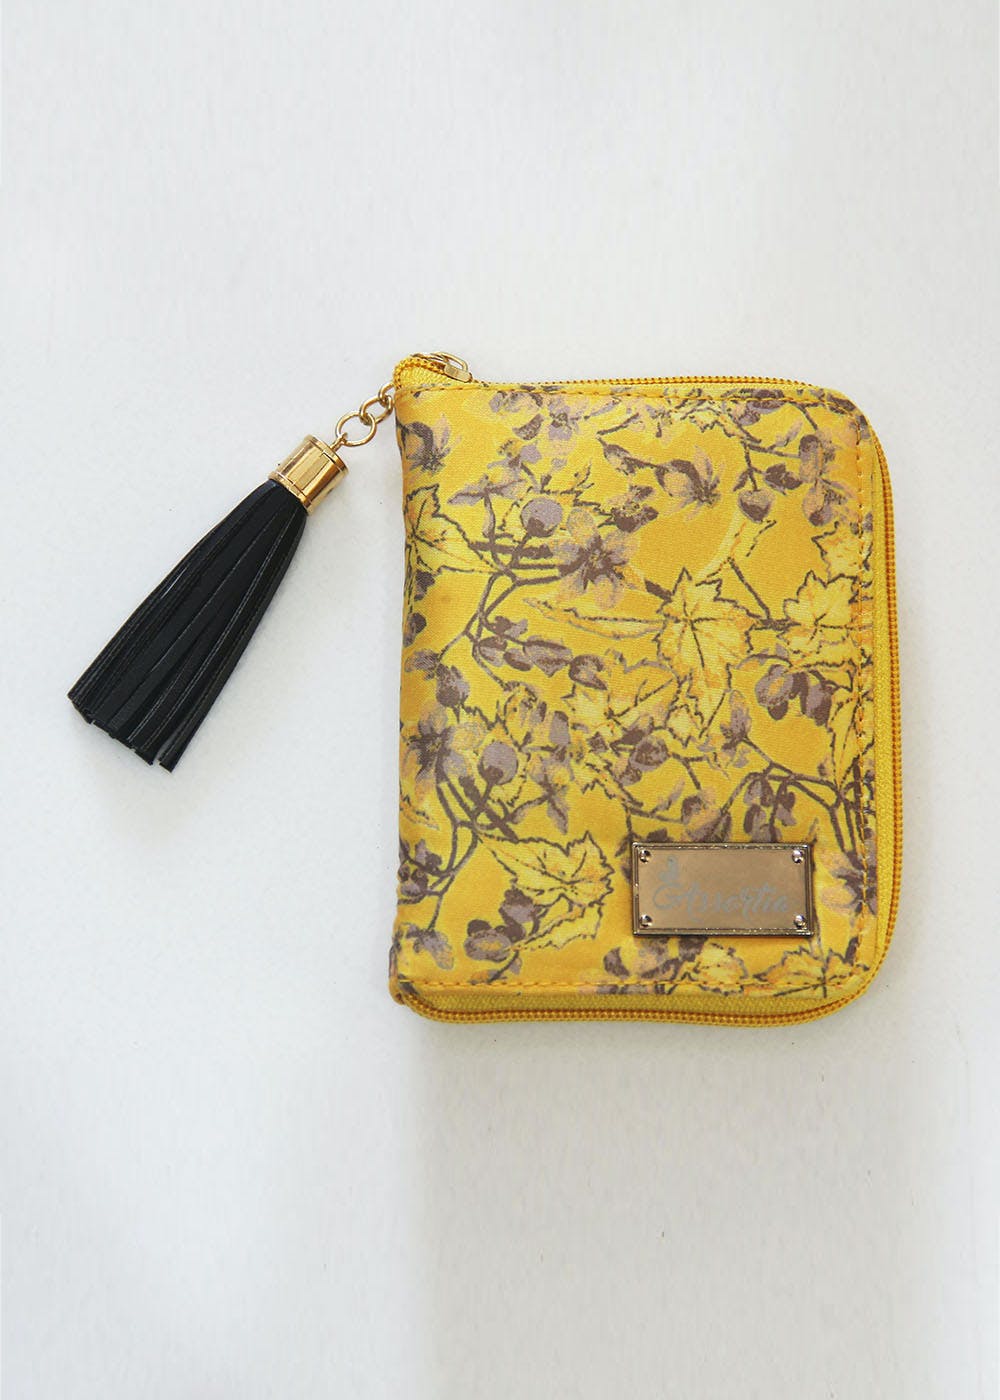 Digital Printed Jute Cotton Clutch Bag in Blue and Yellow : DEE33